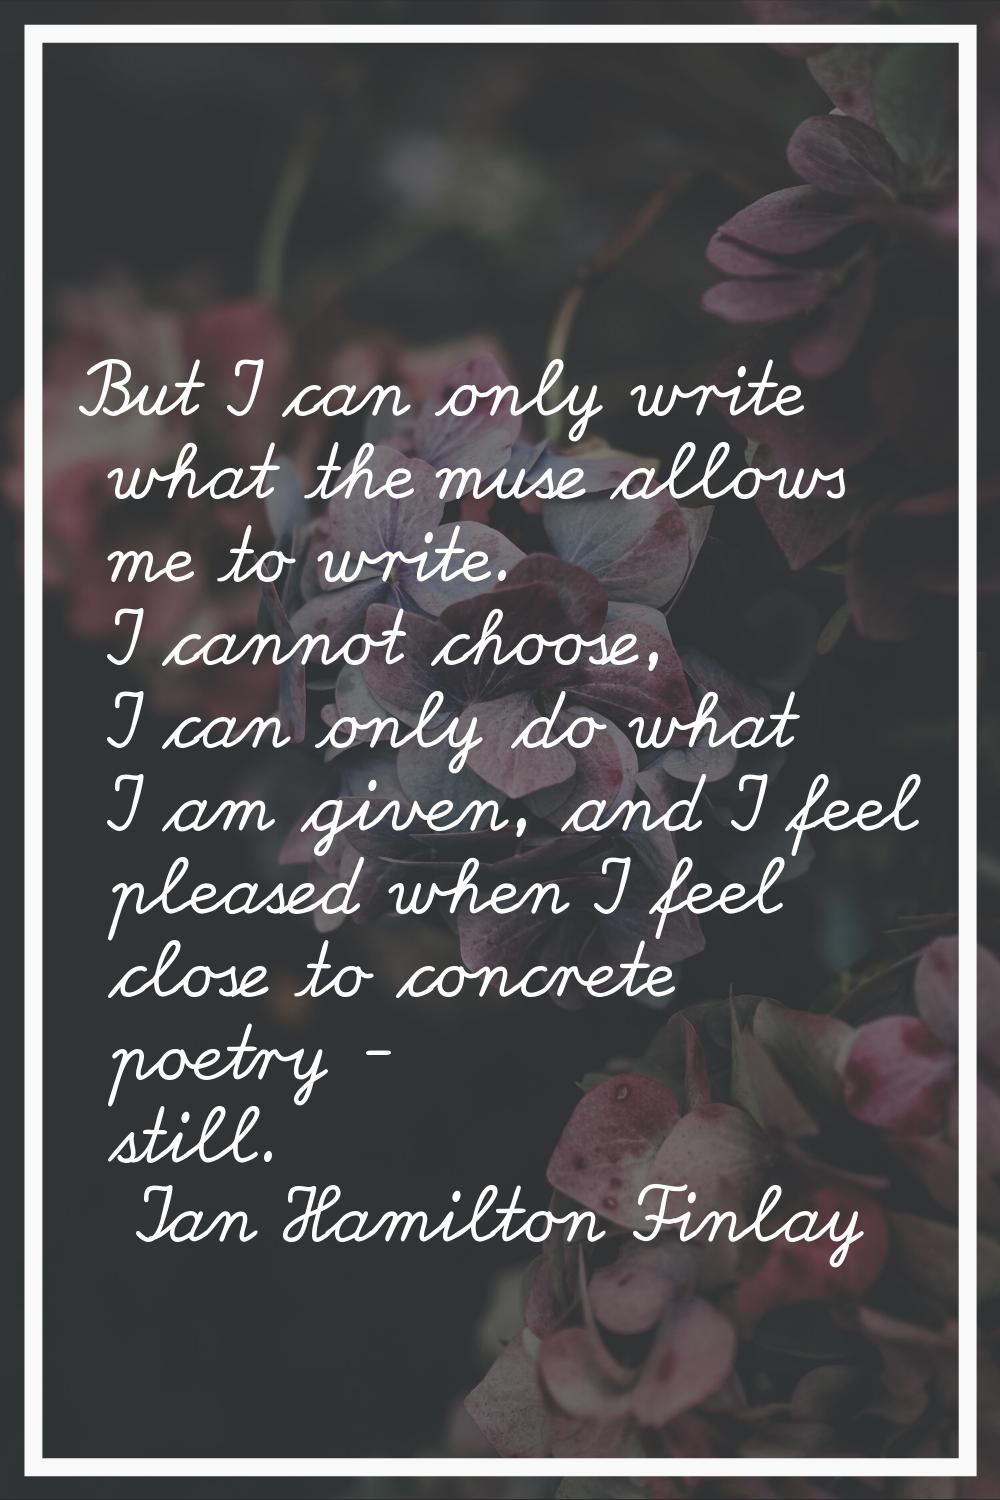 But I can only write what the muse allows me to write. I cannot choose, I can only do what I am giv